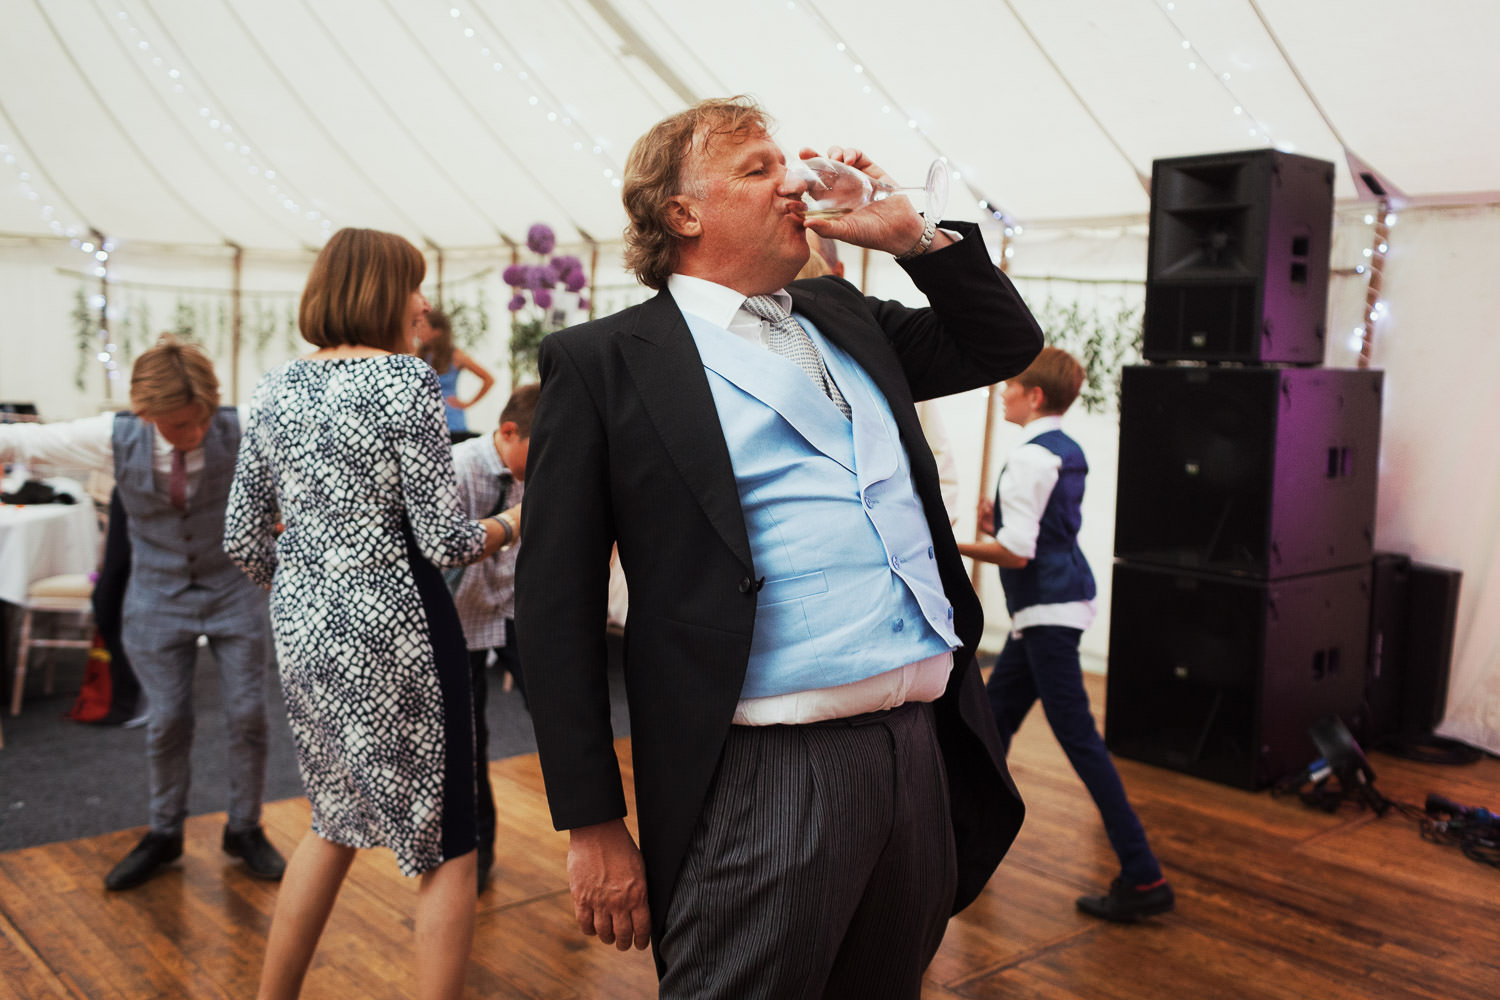 Man in a morning suit drinking wine on the dancefloor.